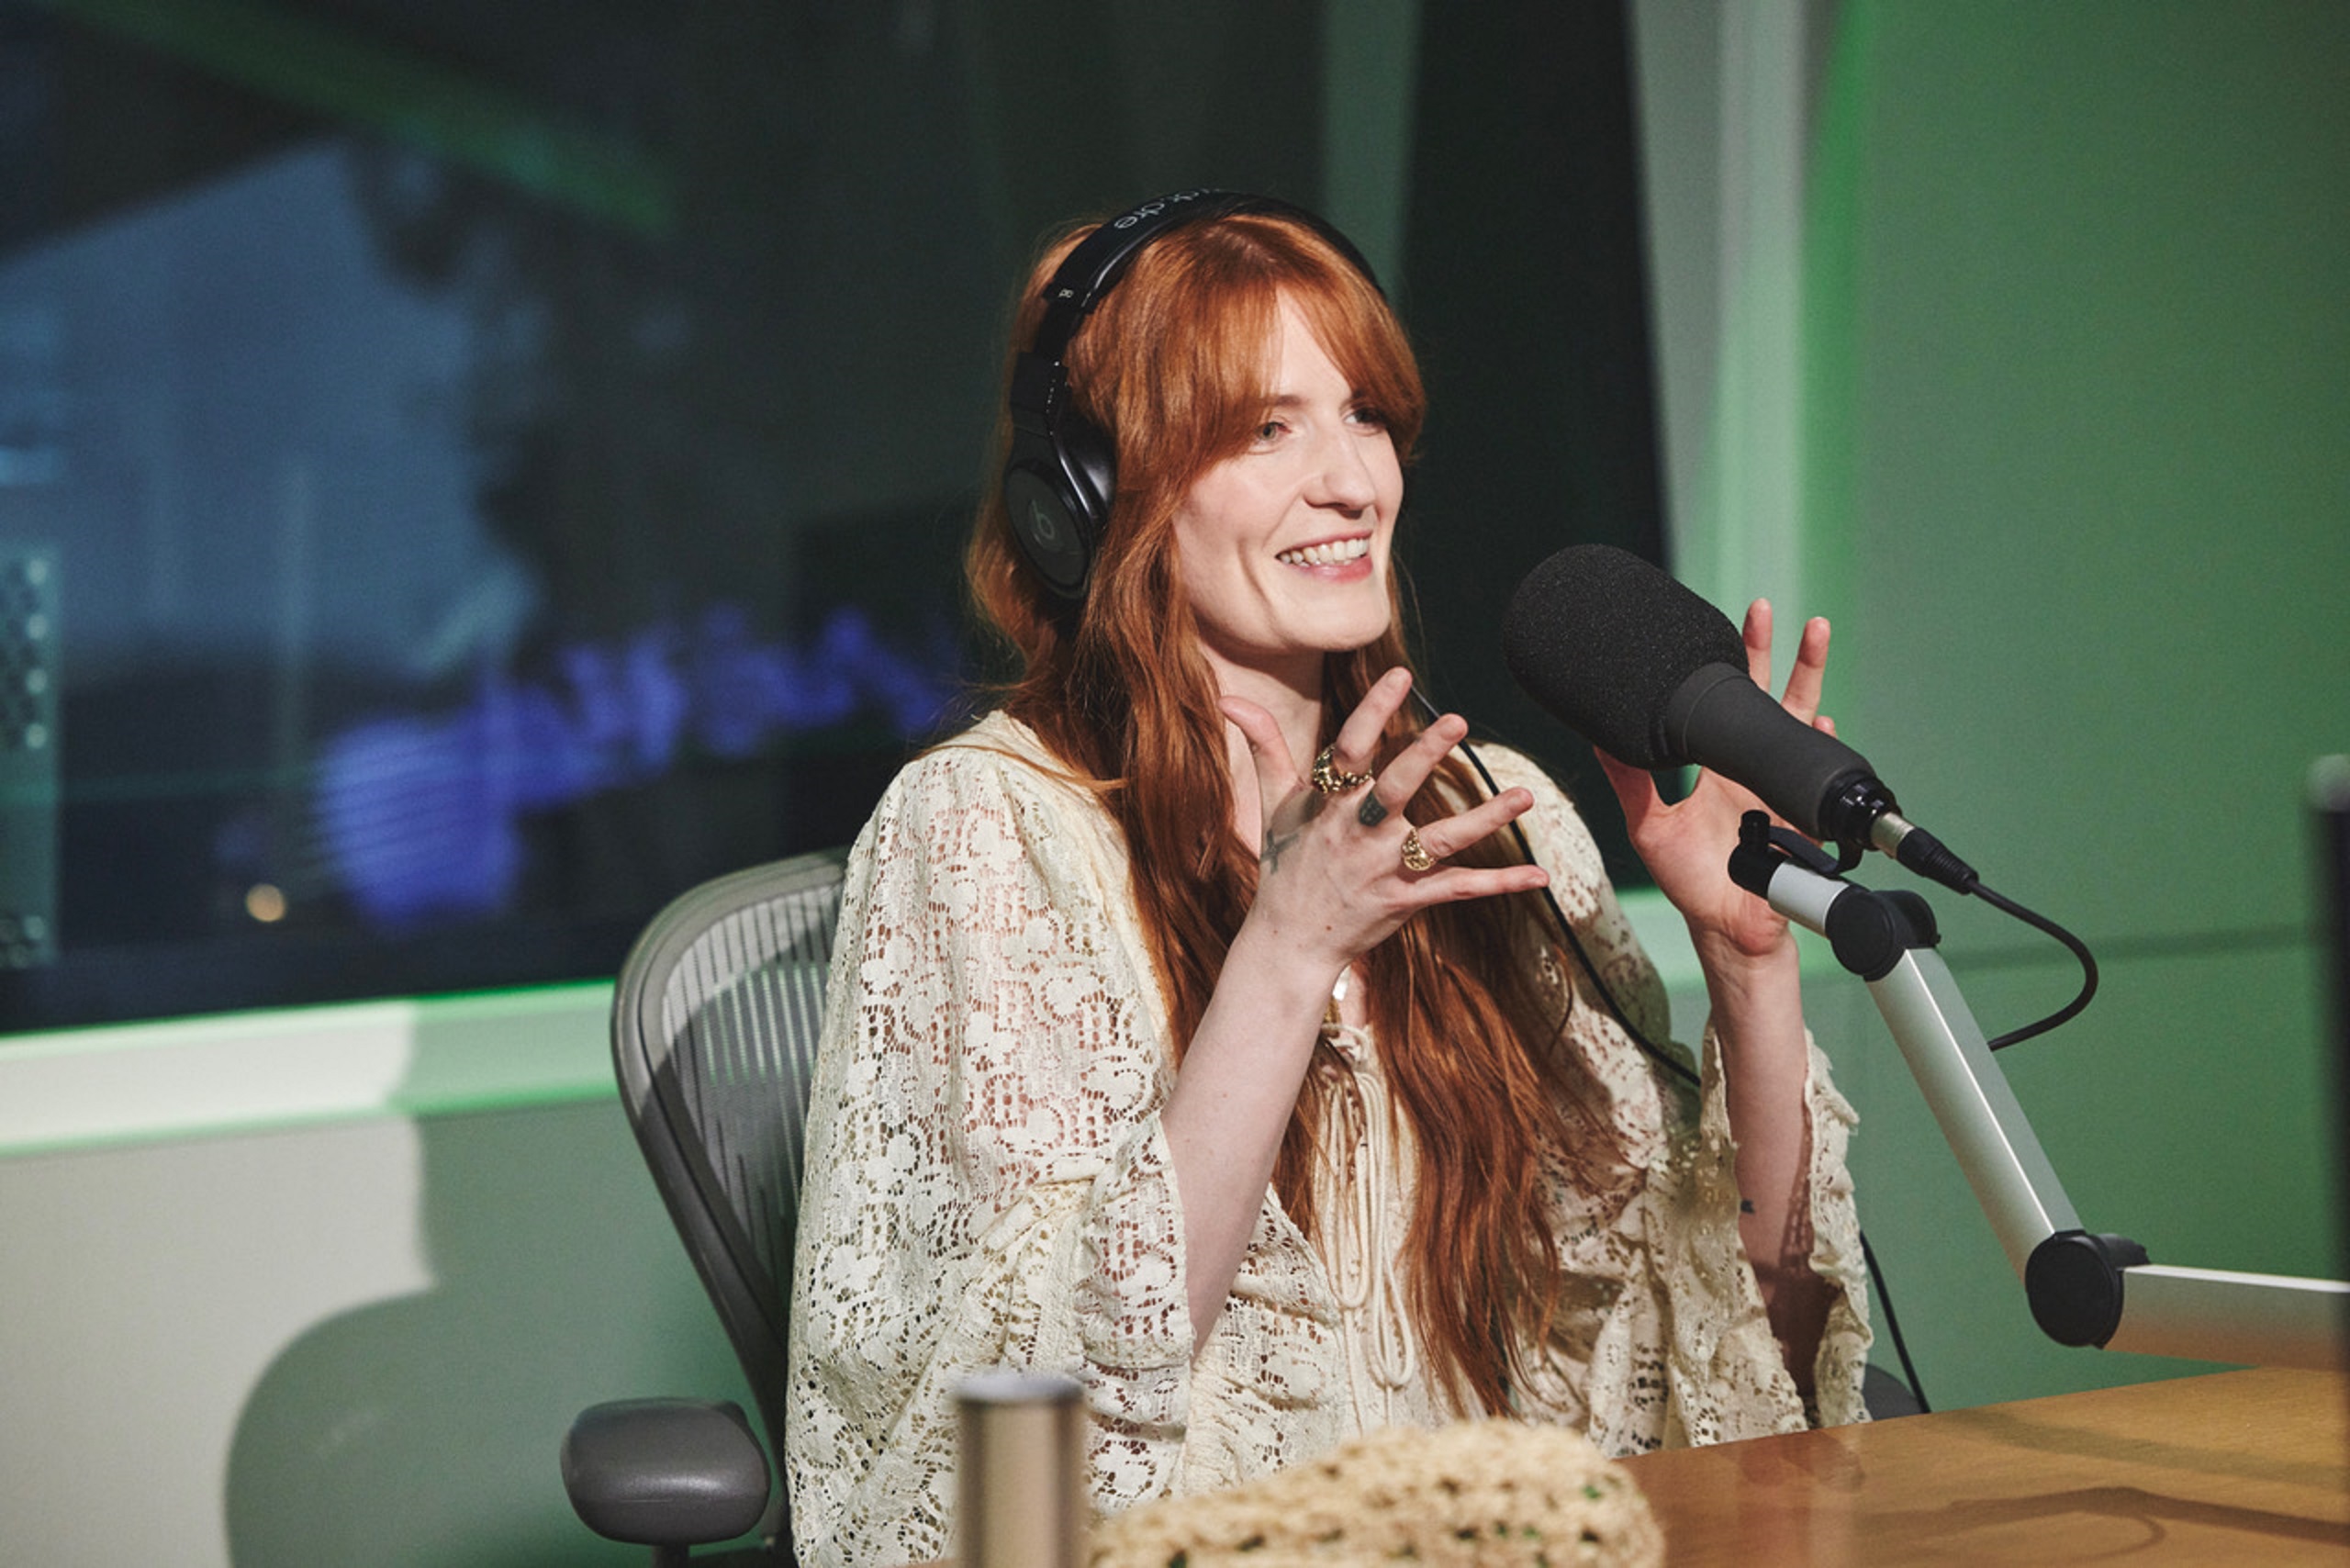 Florence Welch Tells Apple Music About Almost Giving Up On Florence + The Machine's New Album 'Dance Fever', How Humor and Self Awareness Informed The Project, Sobriety During The Pandemic, Working With Jack Antonoff, Nostalgia, and More